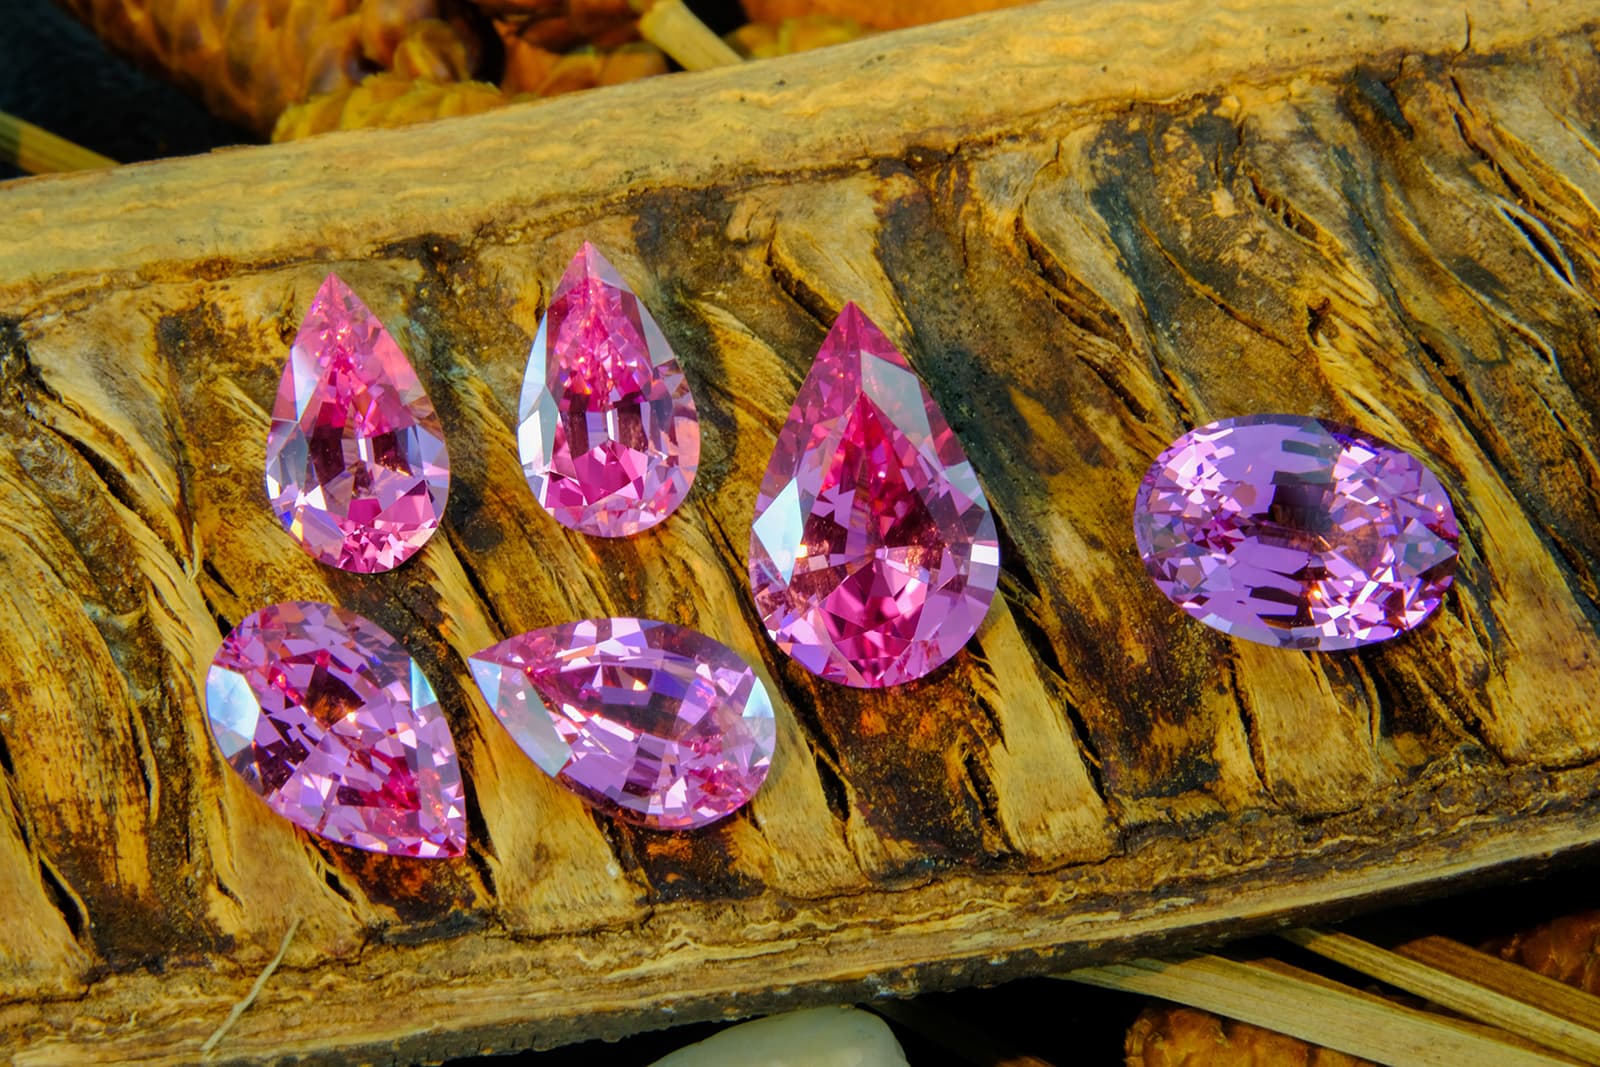 Vladyslav Y. Yavorskyy pink spinel (clockwise from top) pair of pear cuts totaling 5.50ct, 4.96ct pear cut, 4.52ct oval cut, and pair of pear cuts totaling 7.76ct